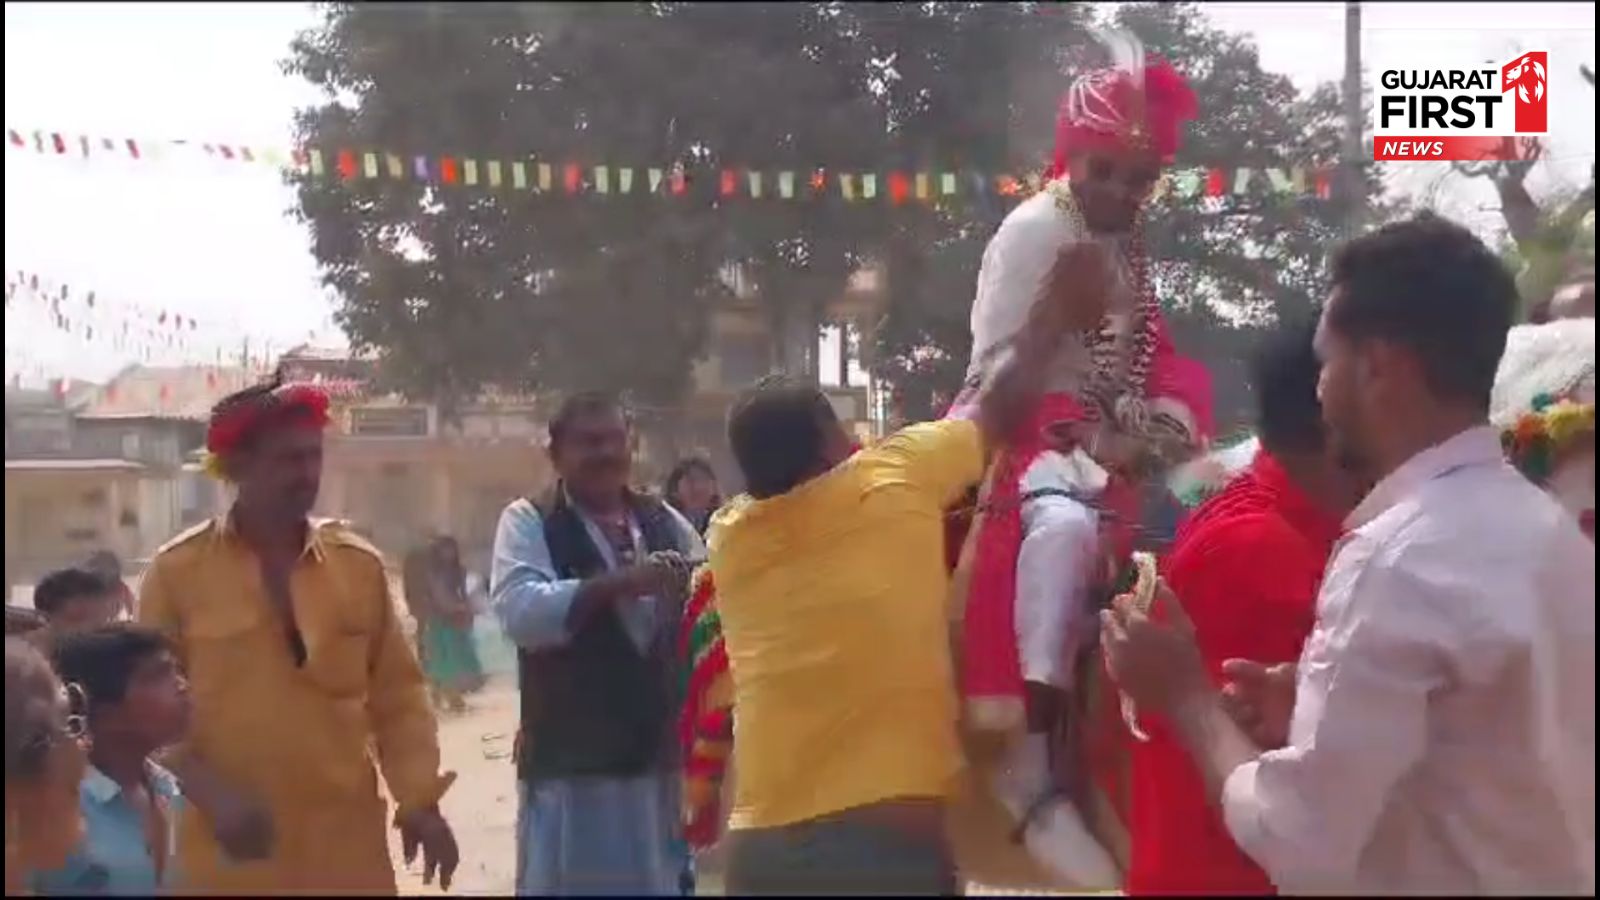 The groom was beaten up on the occasion of a wedding in Mansana's Chadasana village